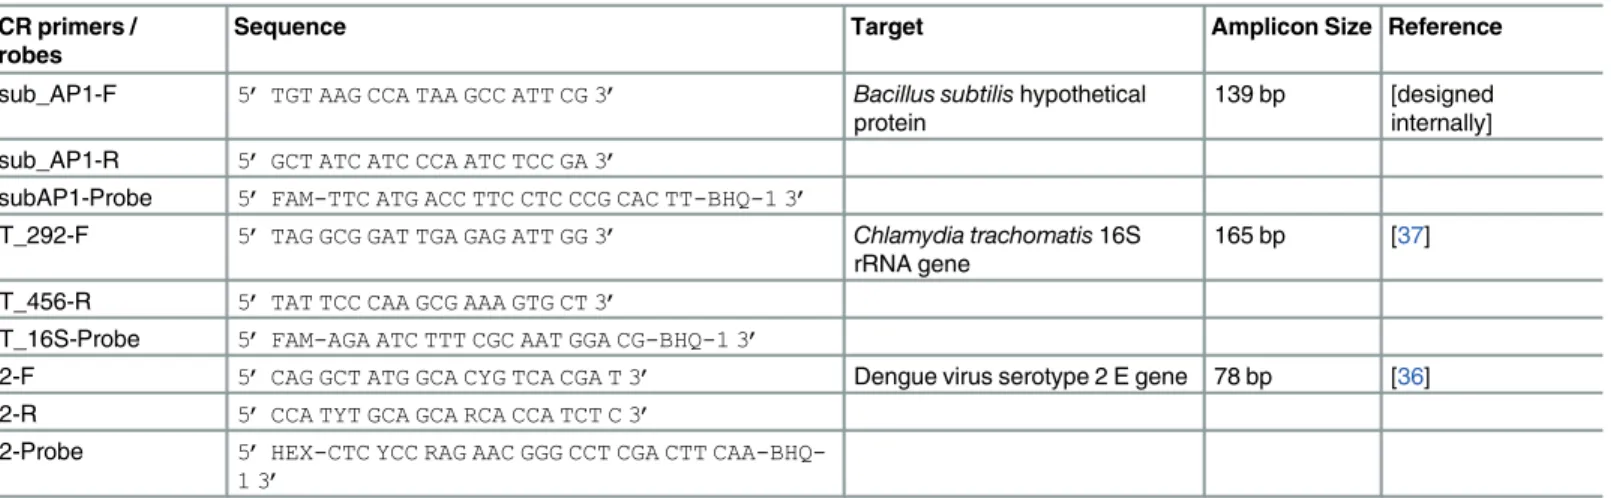 Table 1. Sequence of primers and probes used in this study.